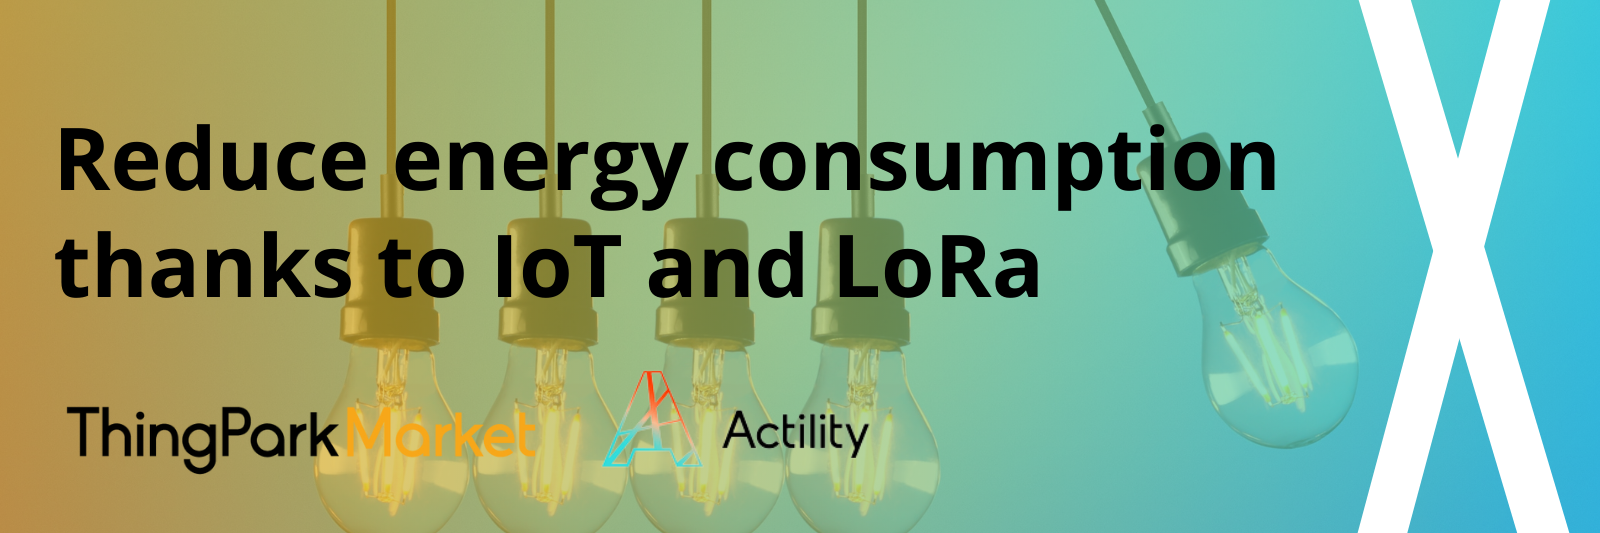 Reduce energy consumption thanks to IoT and LoRa